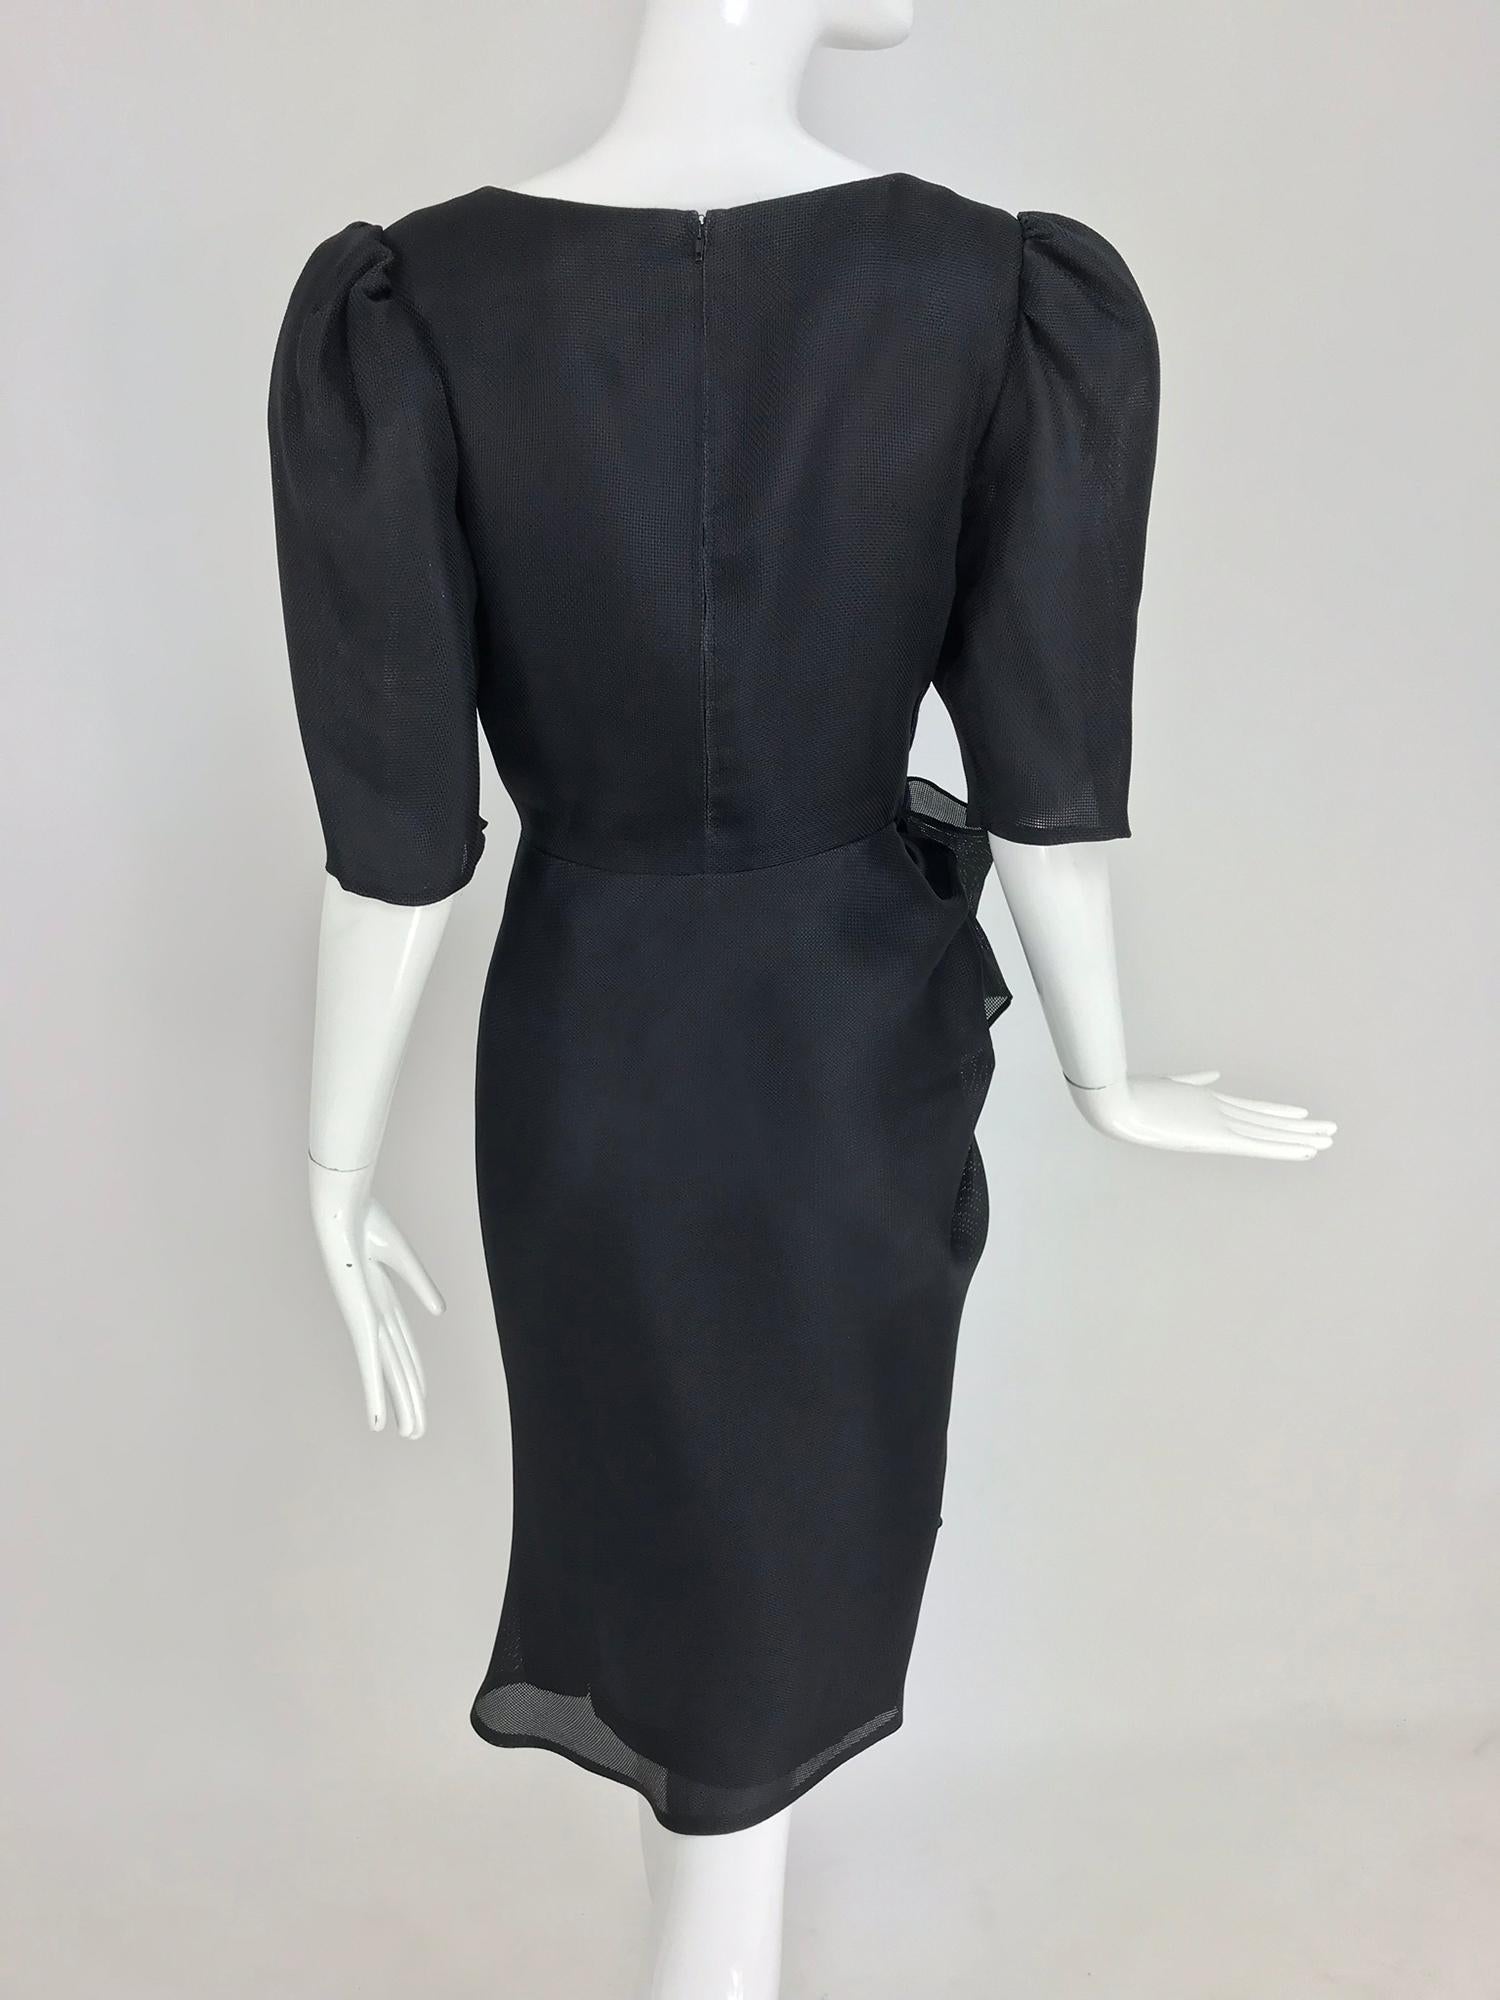 Givency Black Textured Silk Dress with Hip Bow 1990s For Sale 4